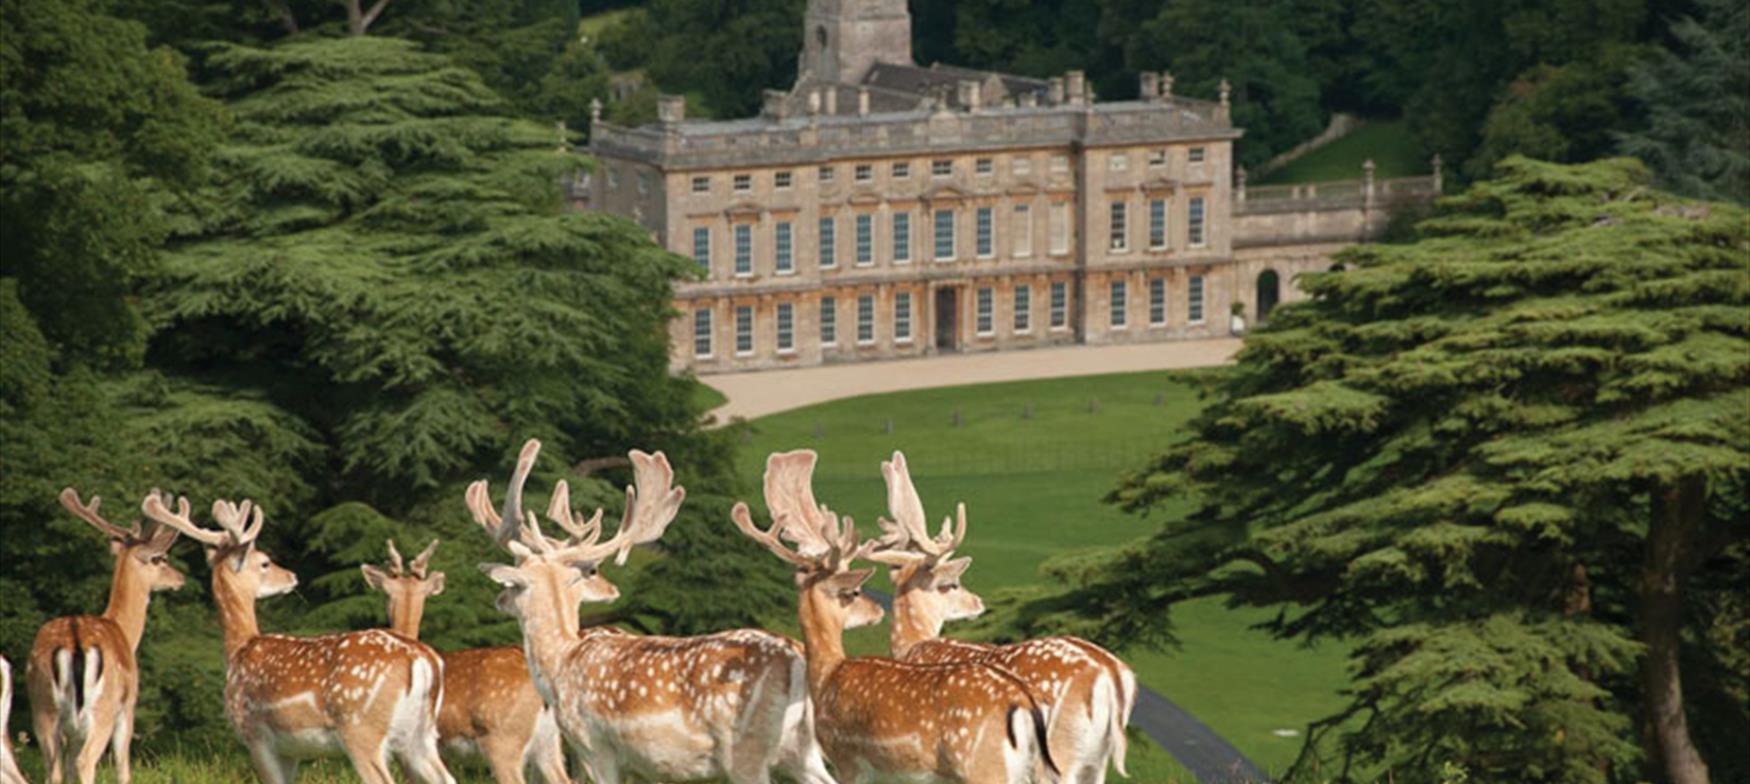 Herd of deer with Dyrham Park in the background